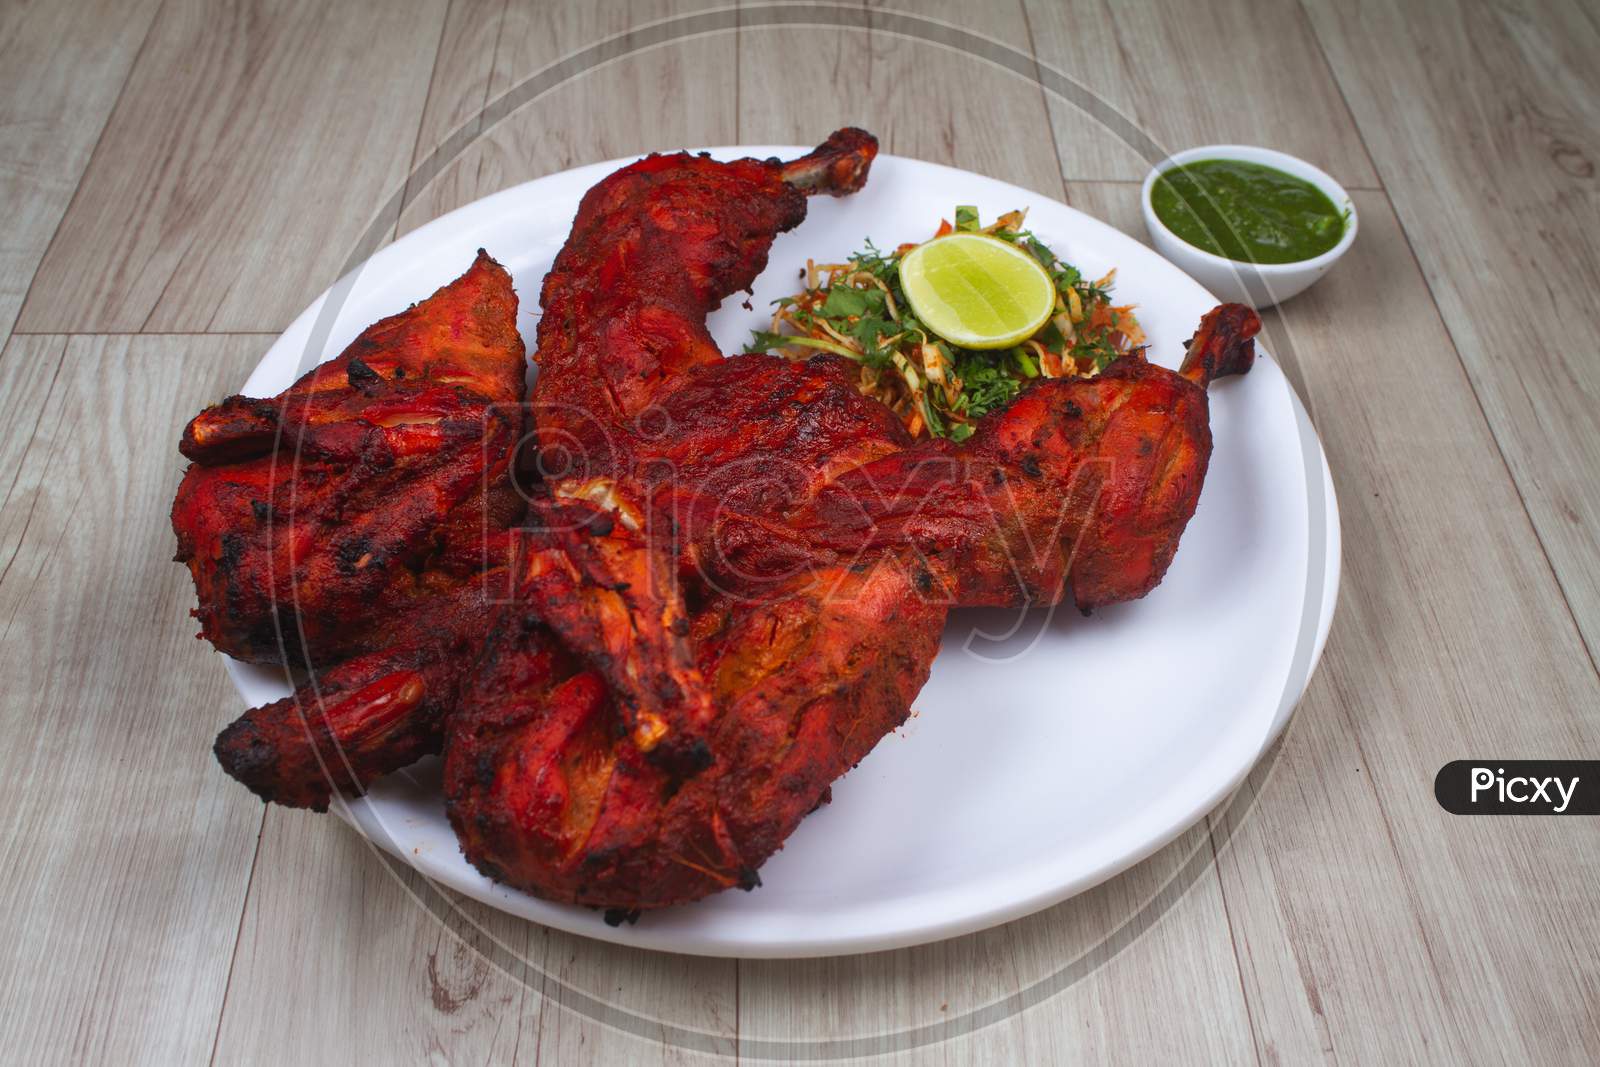 Tandoori Chicken Is Chicken Dish Prepared By Roasting Chicken Marinated In Yoghurt And Spices In A Tandoor, A Cylindrical Clay Oven. It Is A Popular Dish From The Indian.